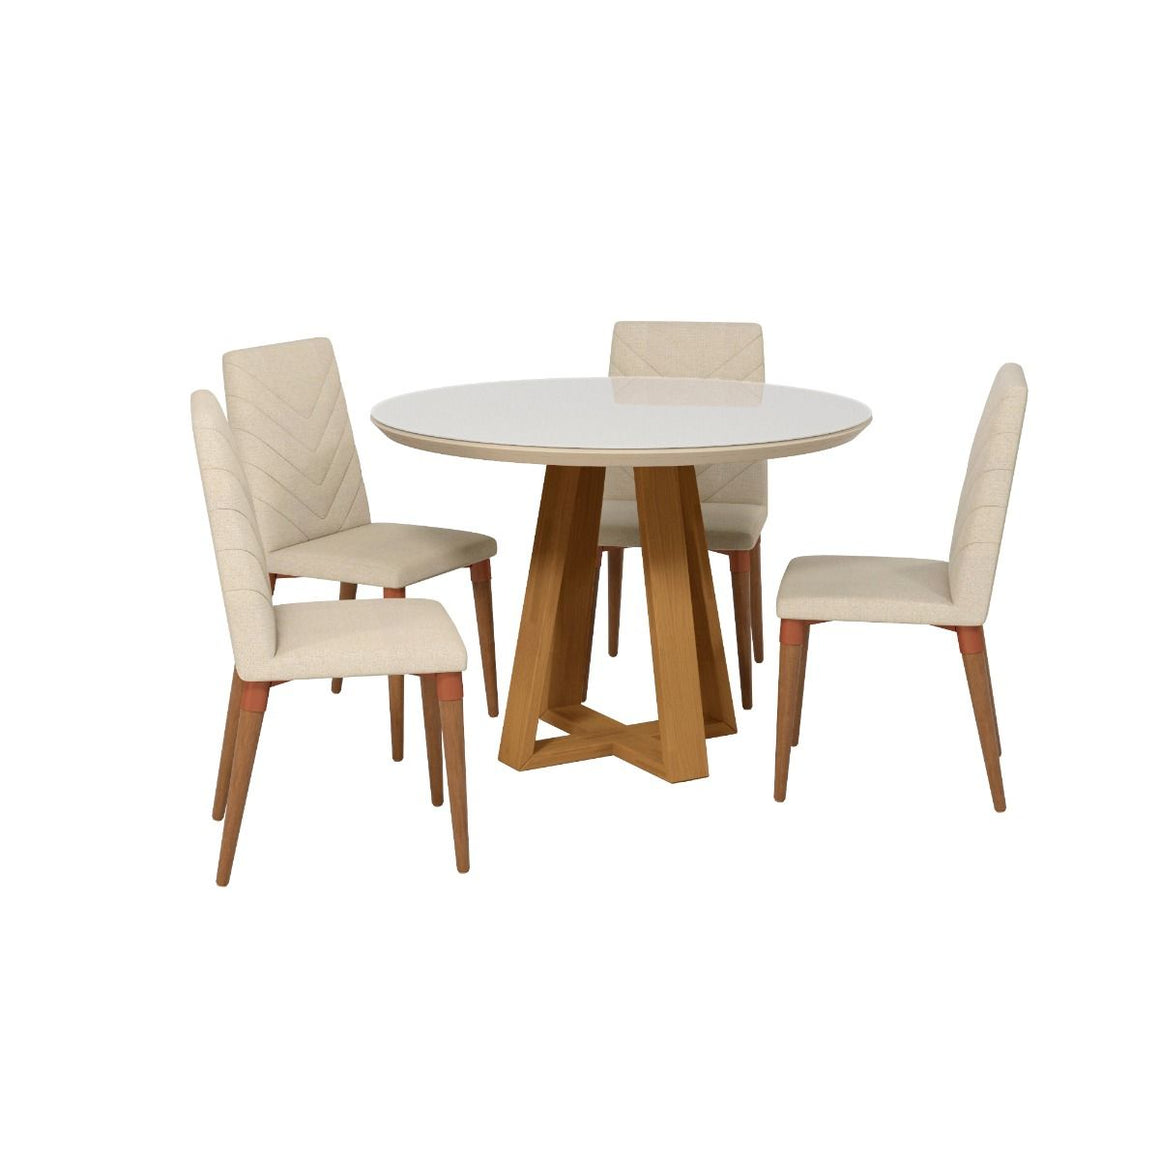 Duffy 45.27 Modern Round Dining Table and Utopia Chevron Dining Chairs in Off White and Beige - Set of 5